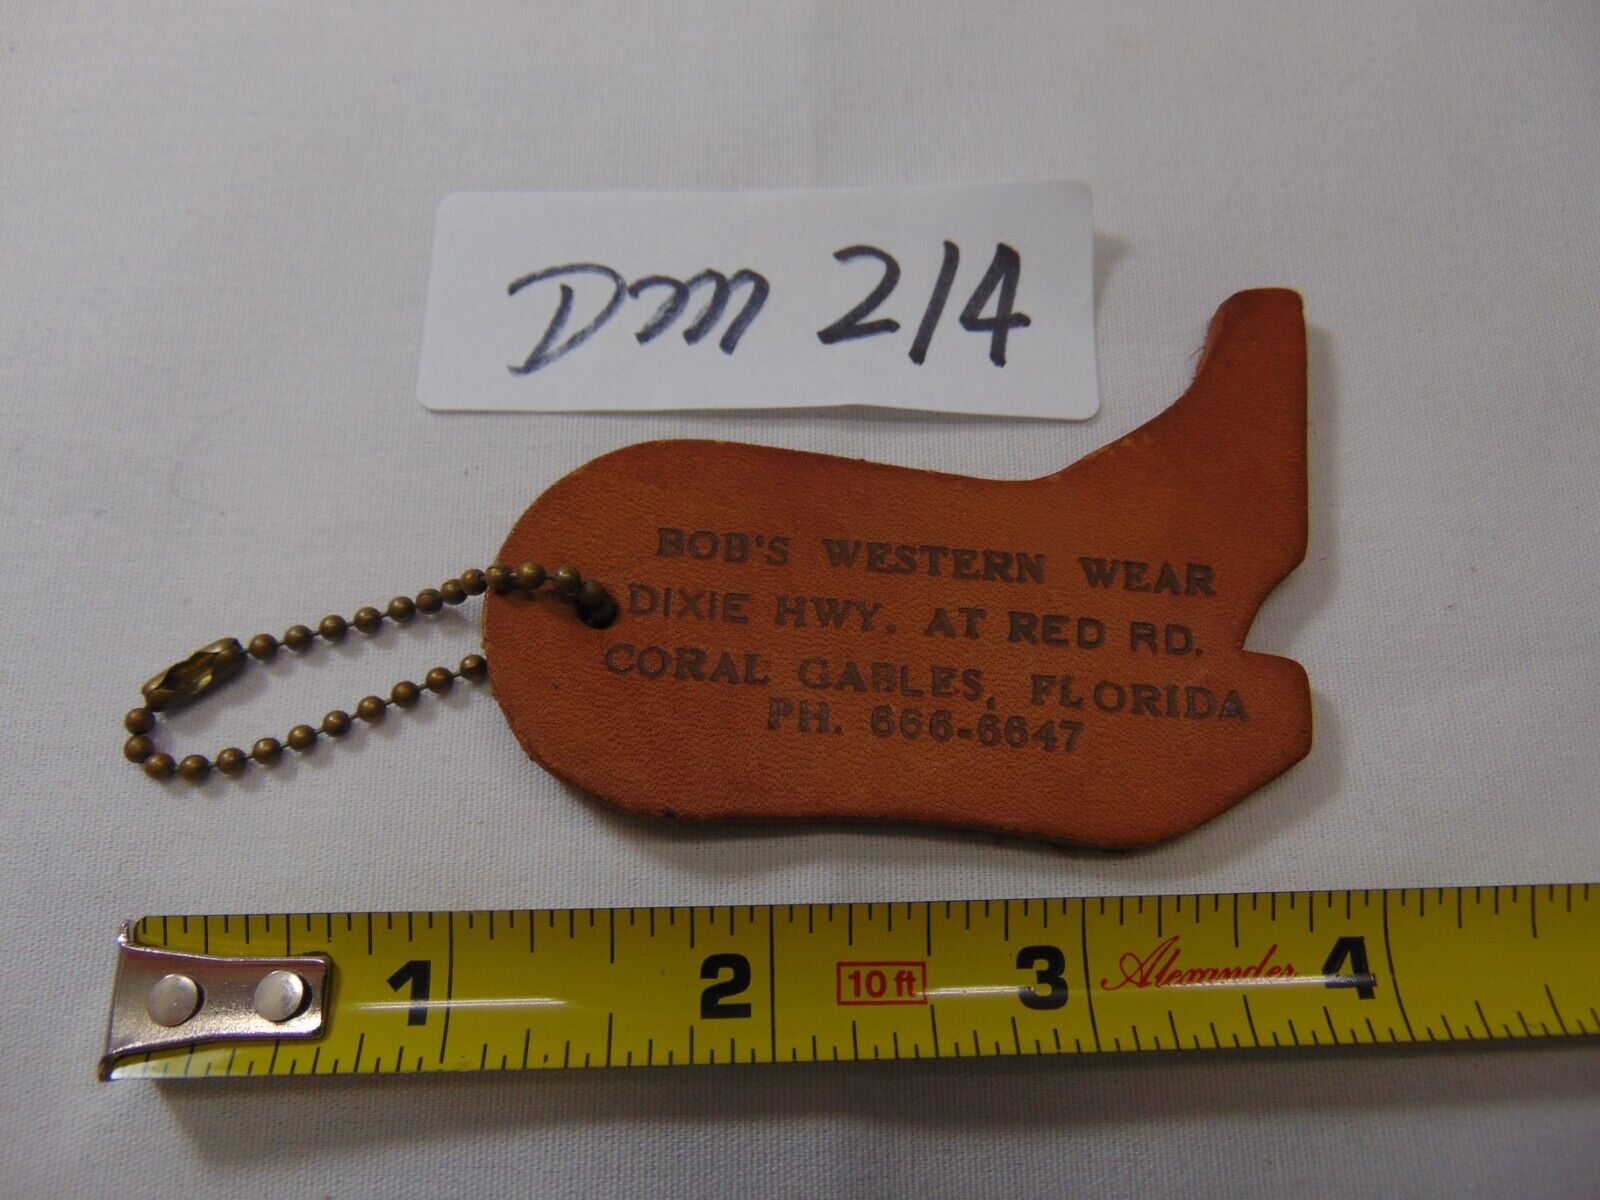 Justin Boots Keychain Advertising Leather Bob\'s Western Wear Coral Gables Fl